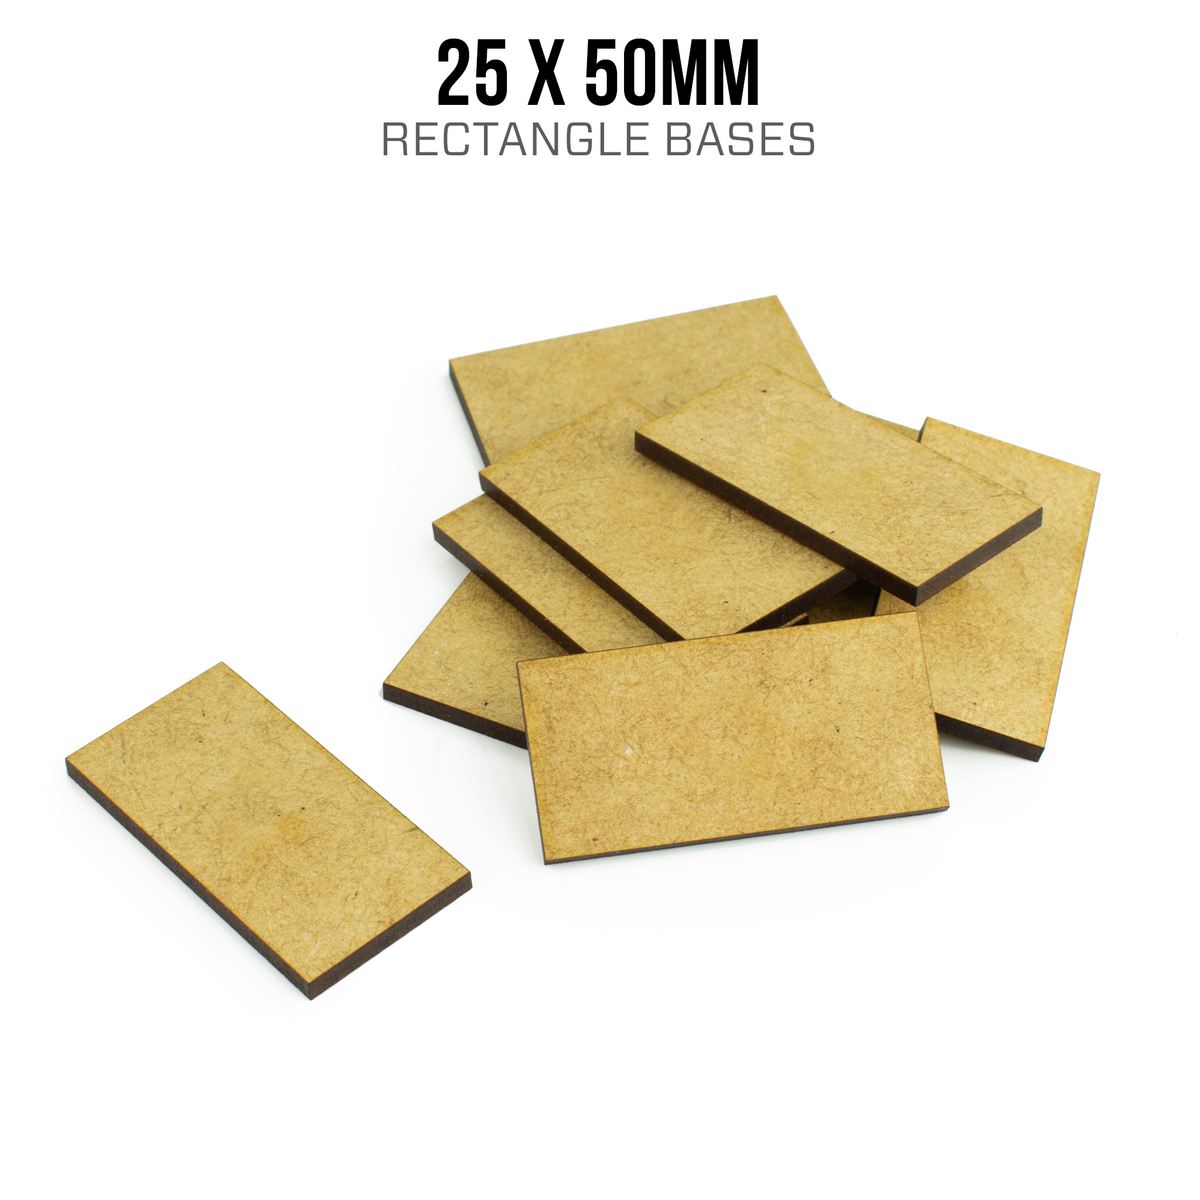 25 x 50mm Rectangle Bases